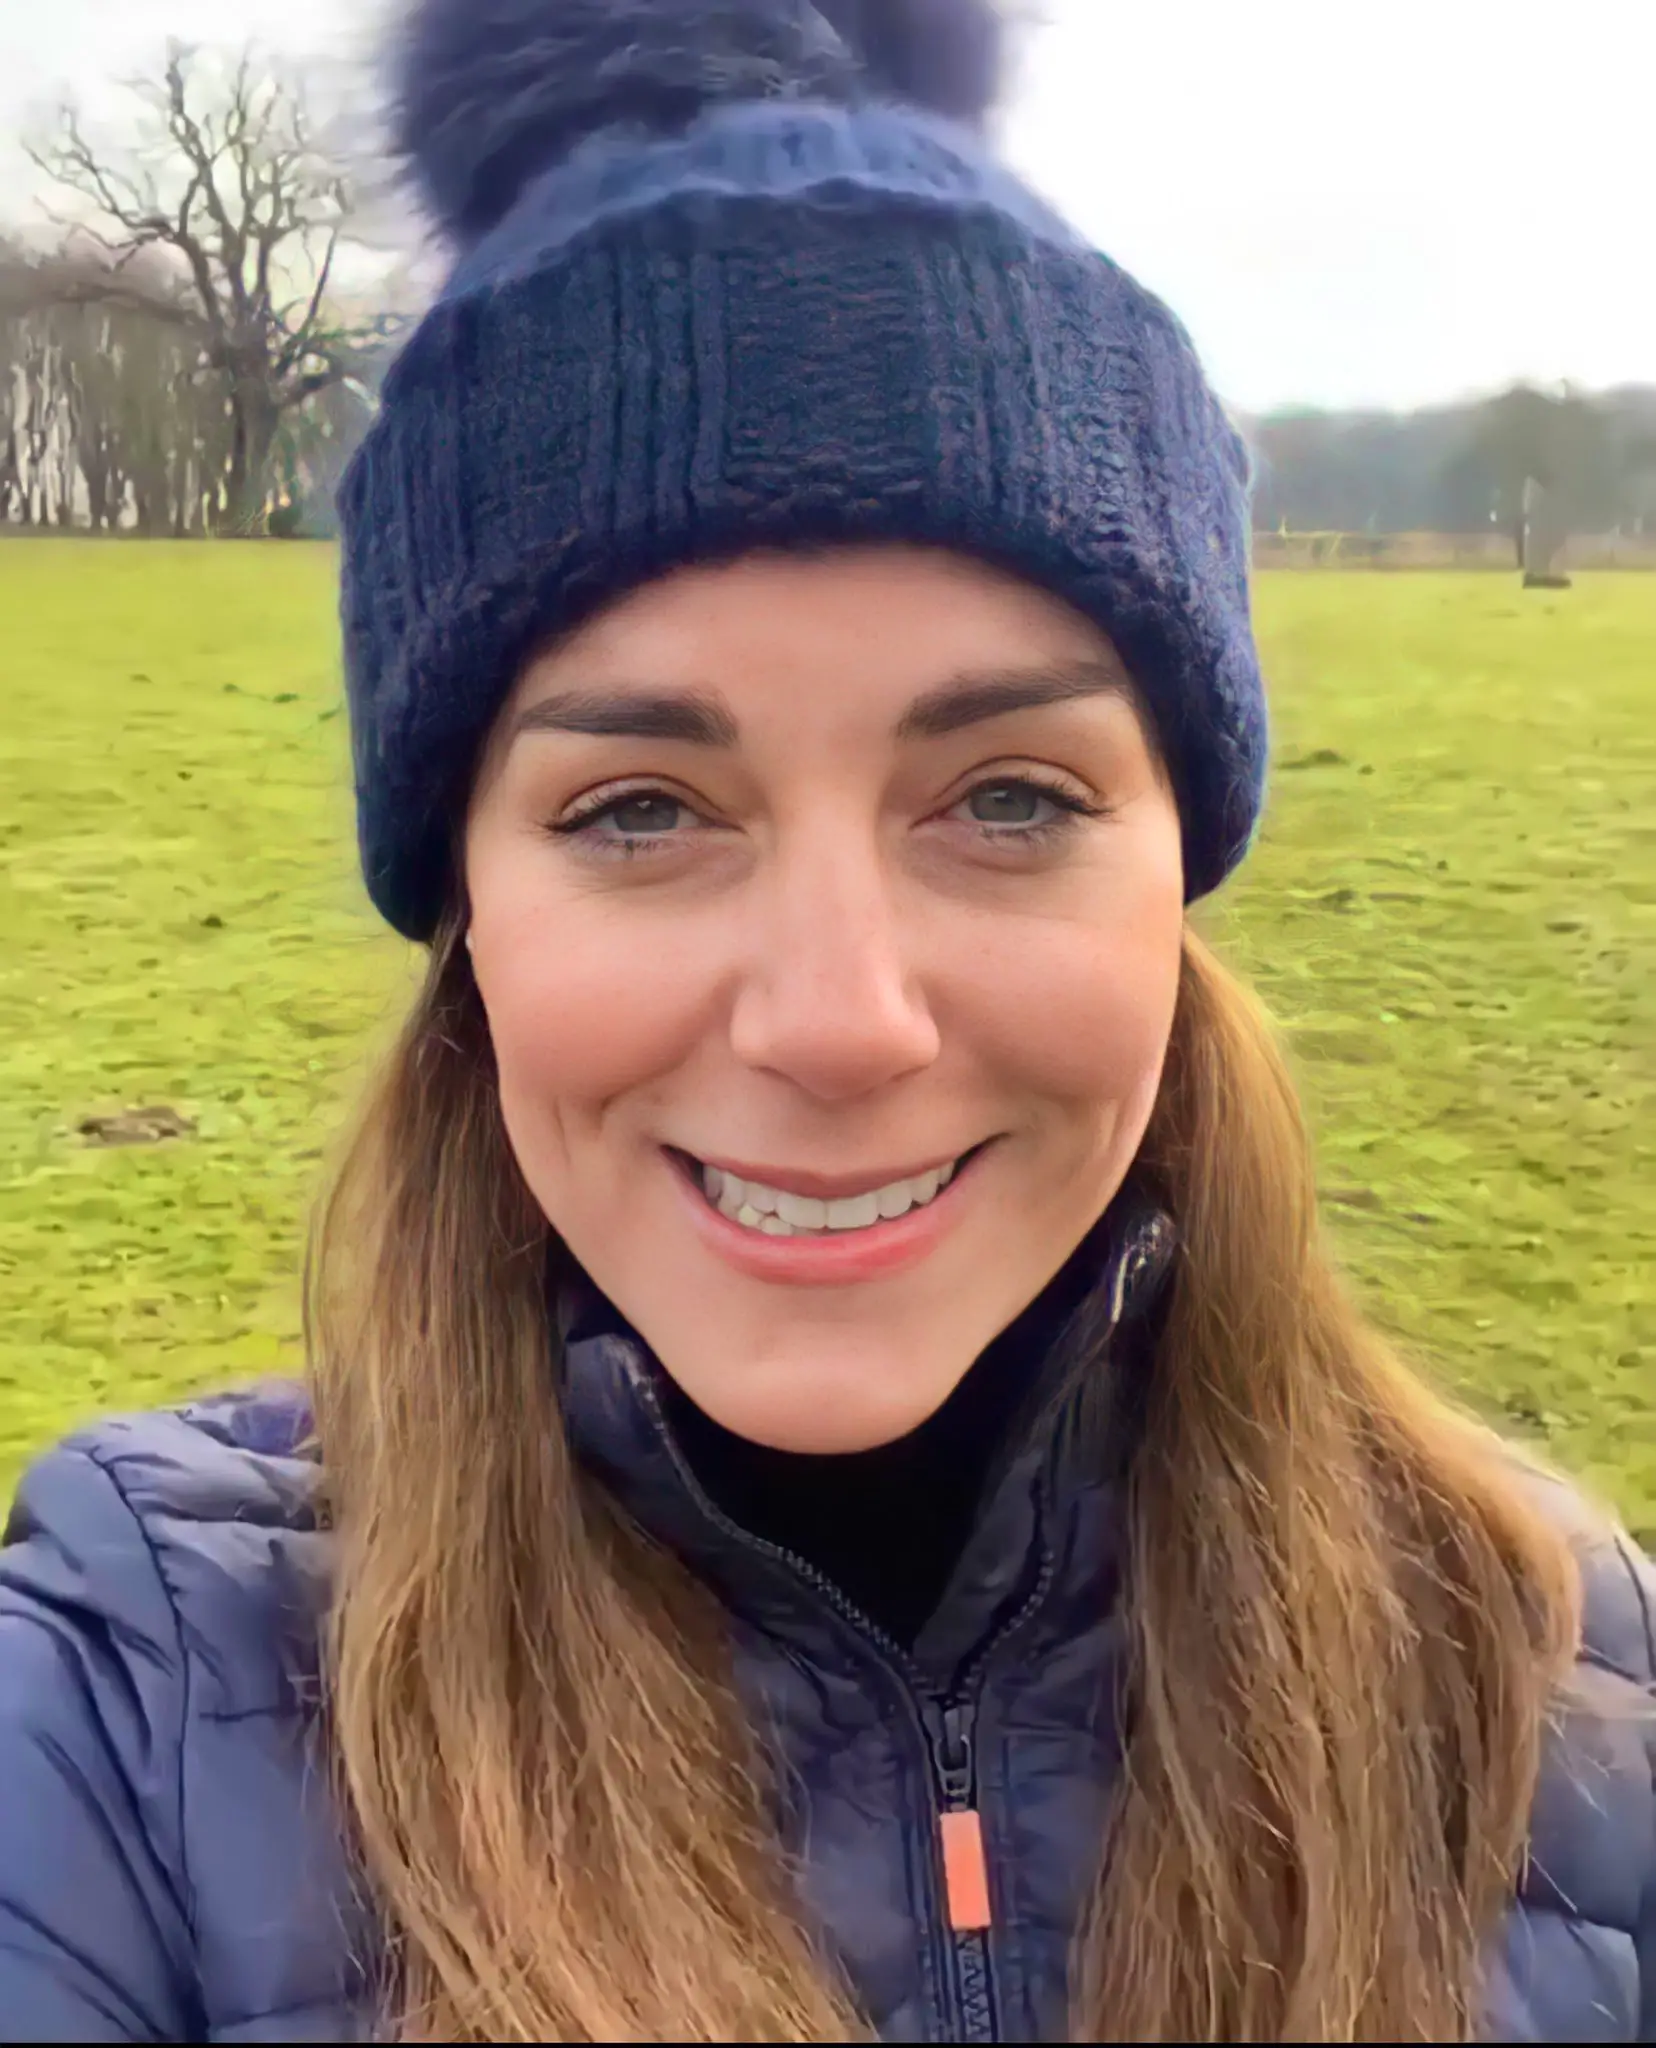 The Duchess of Cambridge recorded her first selfie video to mark the Children's Mental Health week